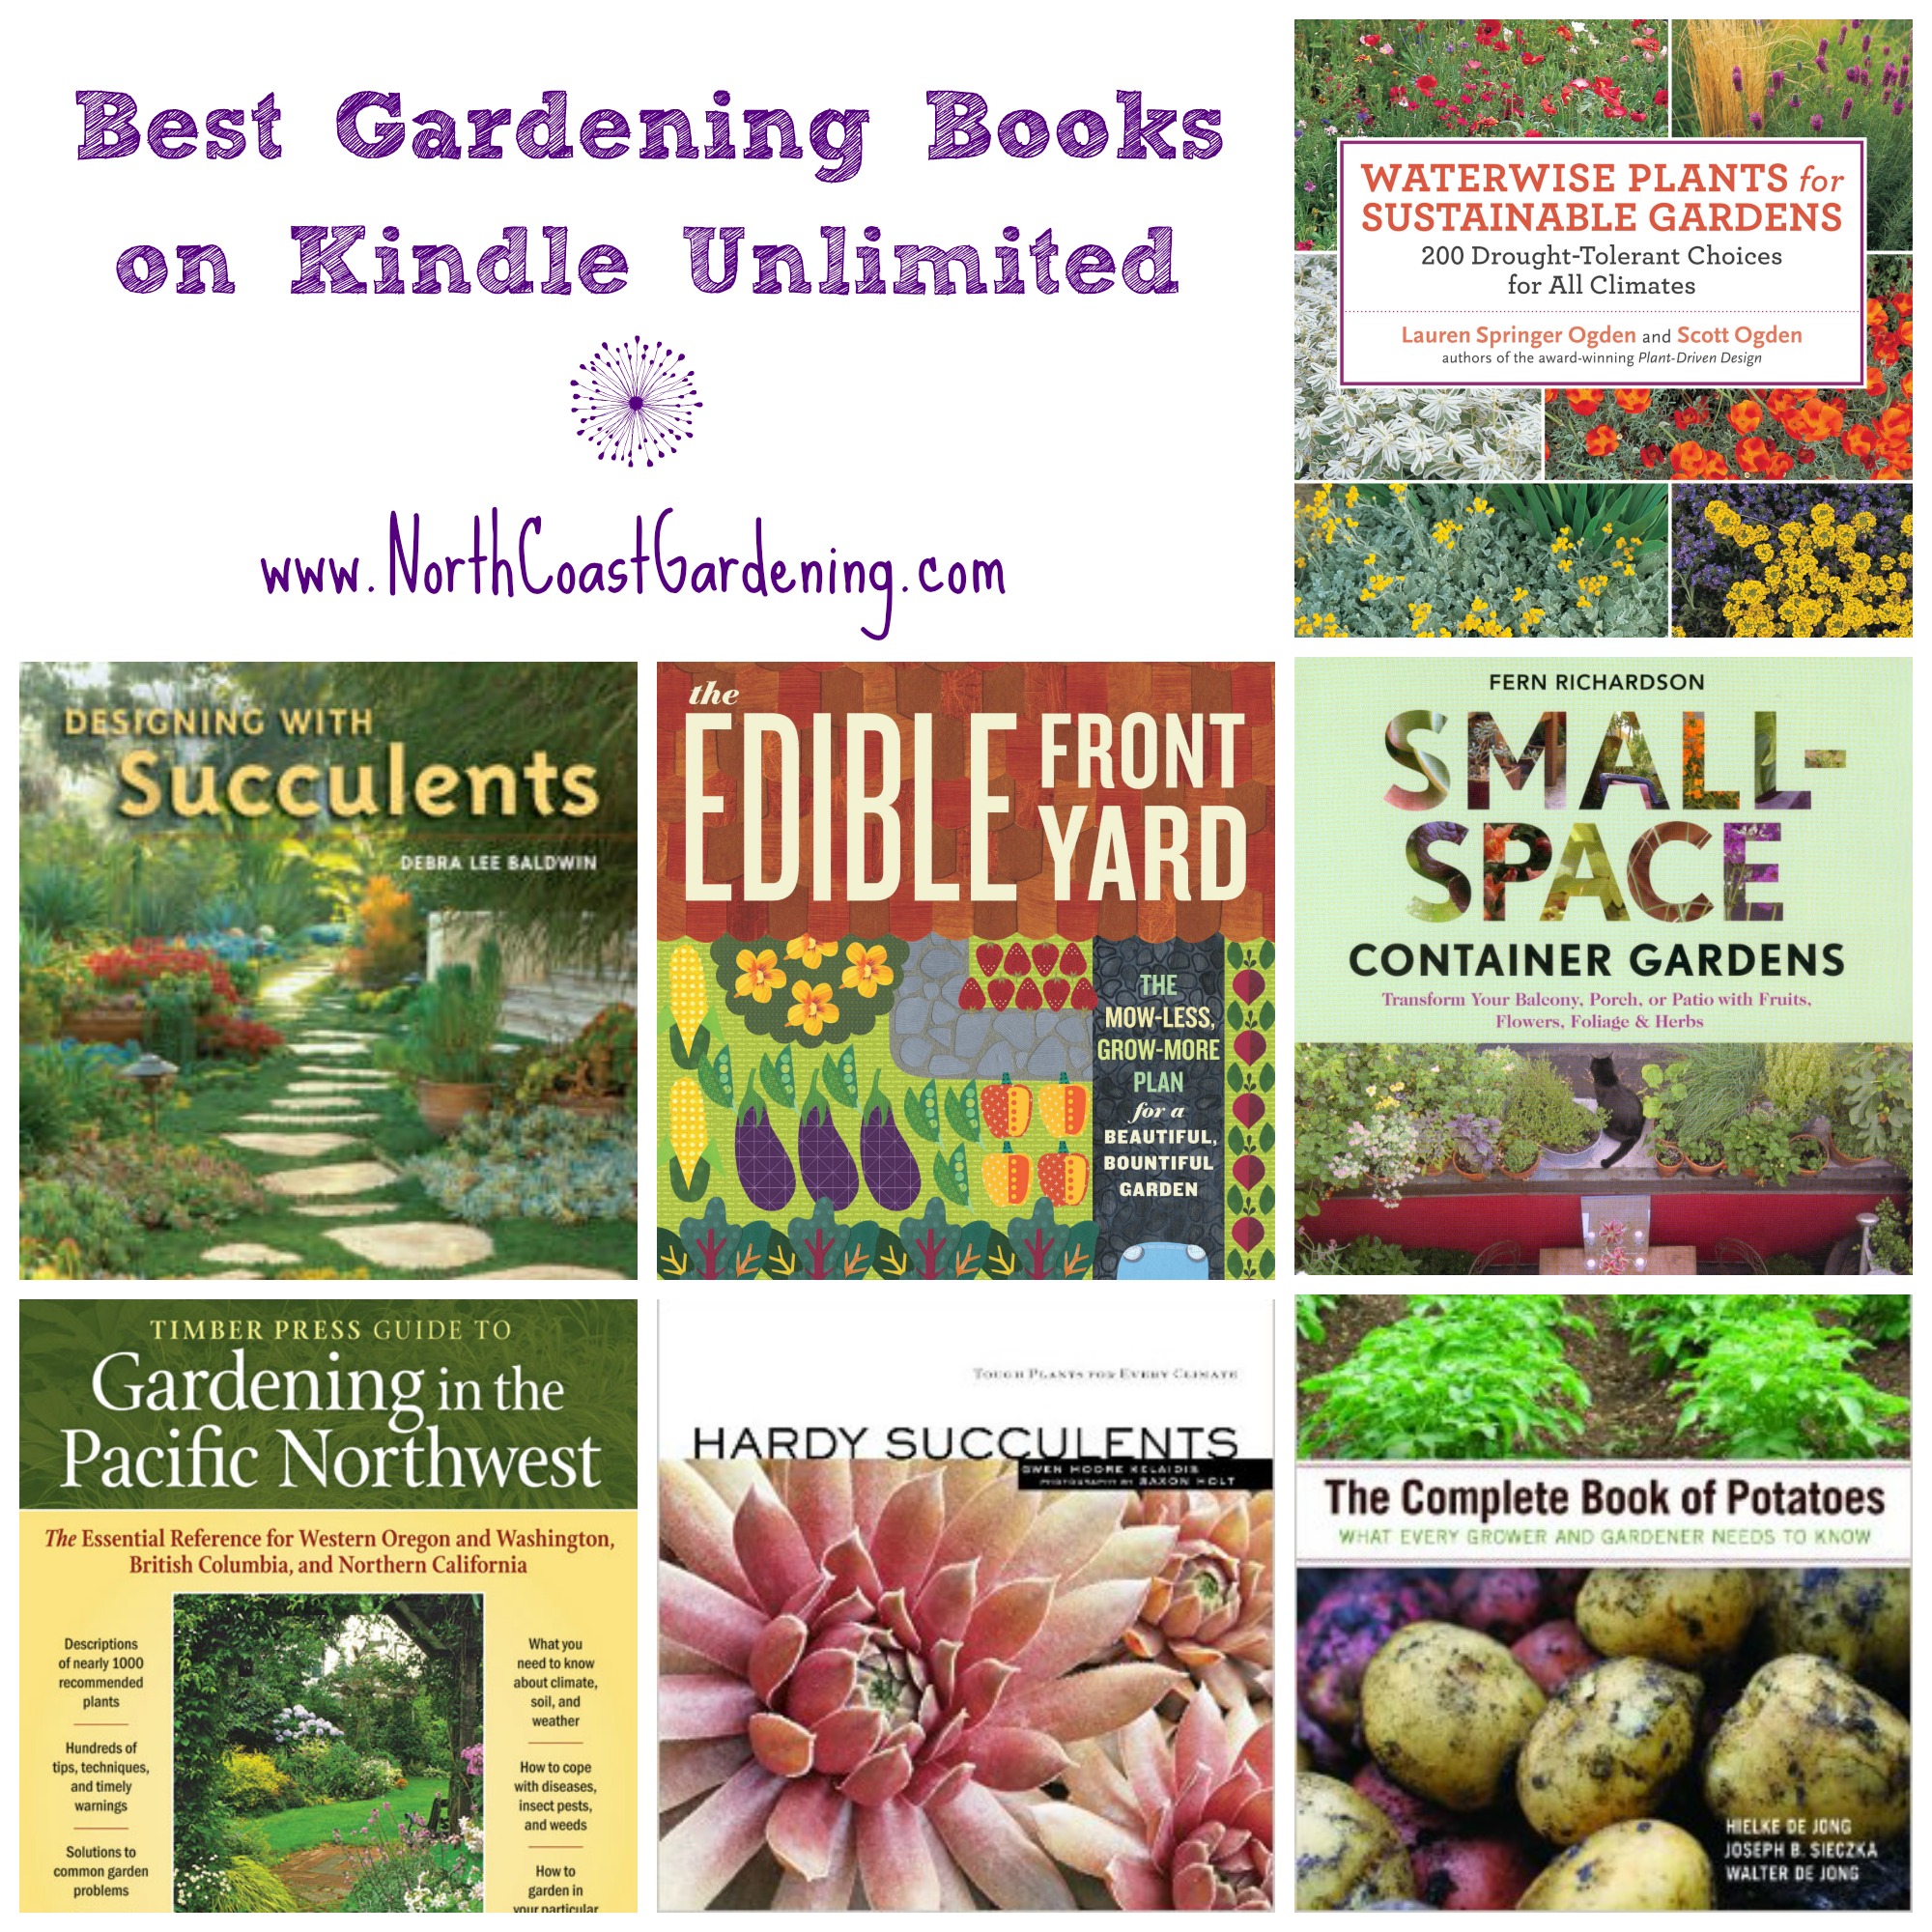 The Timber Press Guide to Vegetable Gardening in the Southeast [Book]